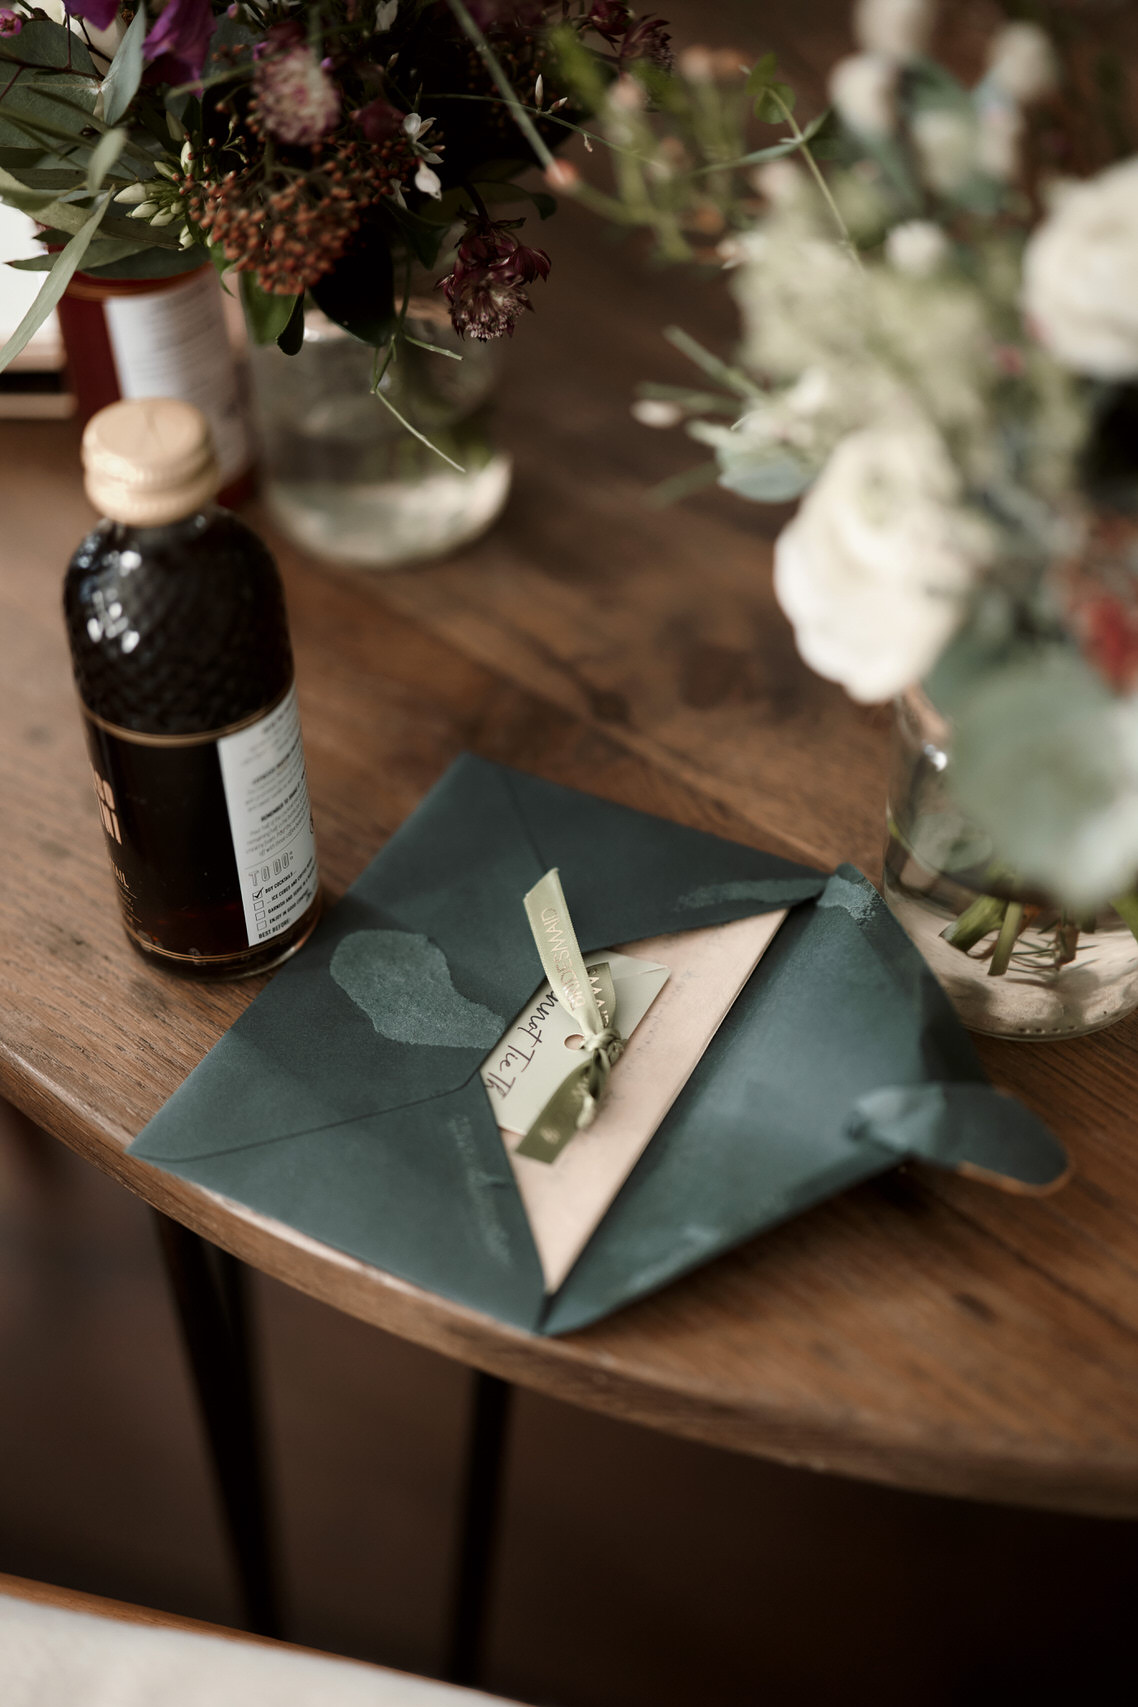 A green envelope tied with a ribbon sits beside a bottle of fluid.